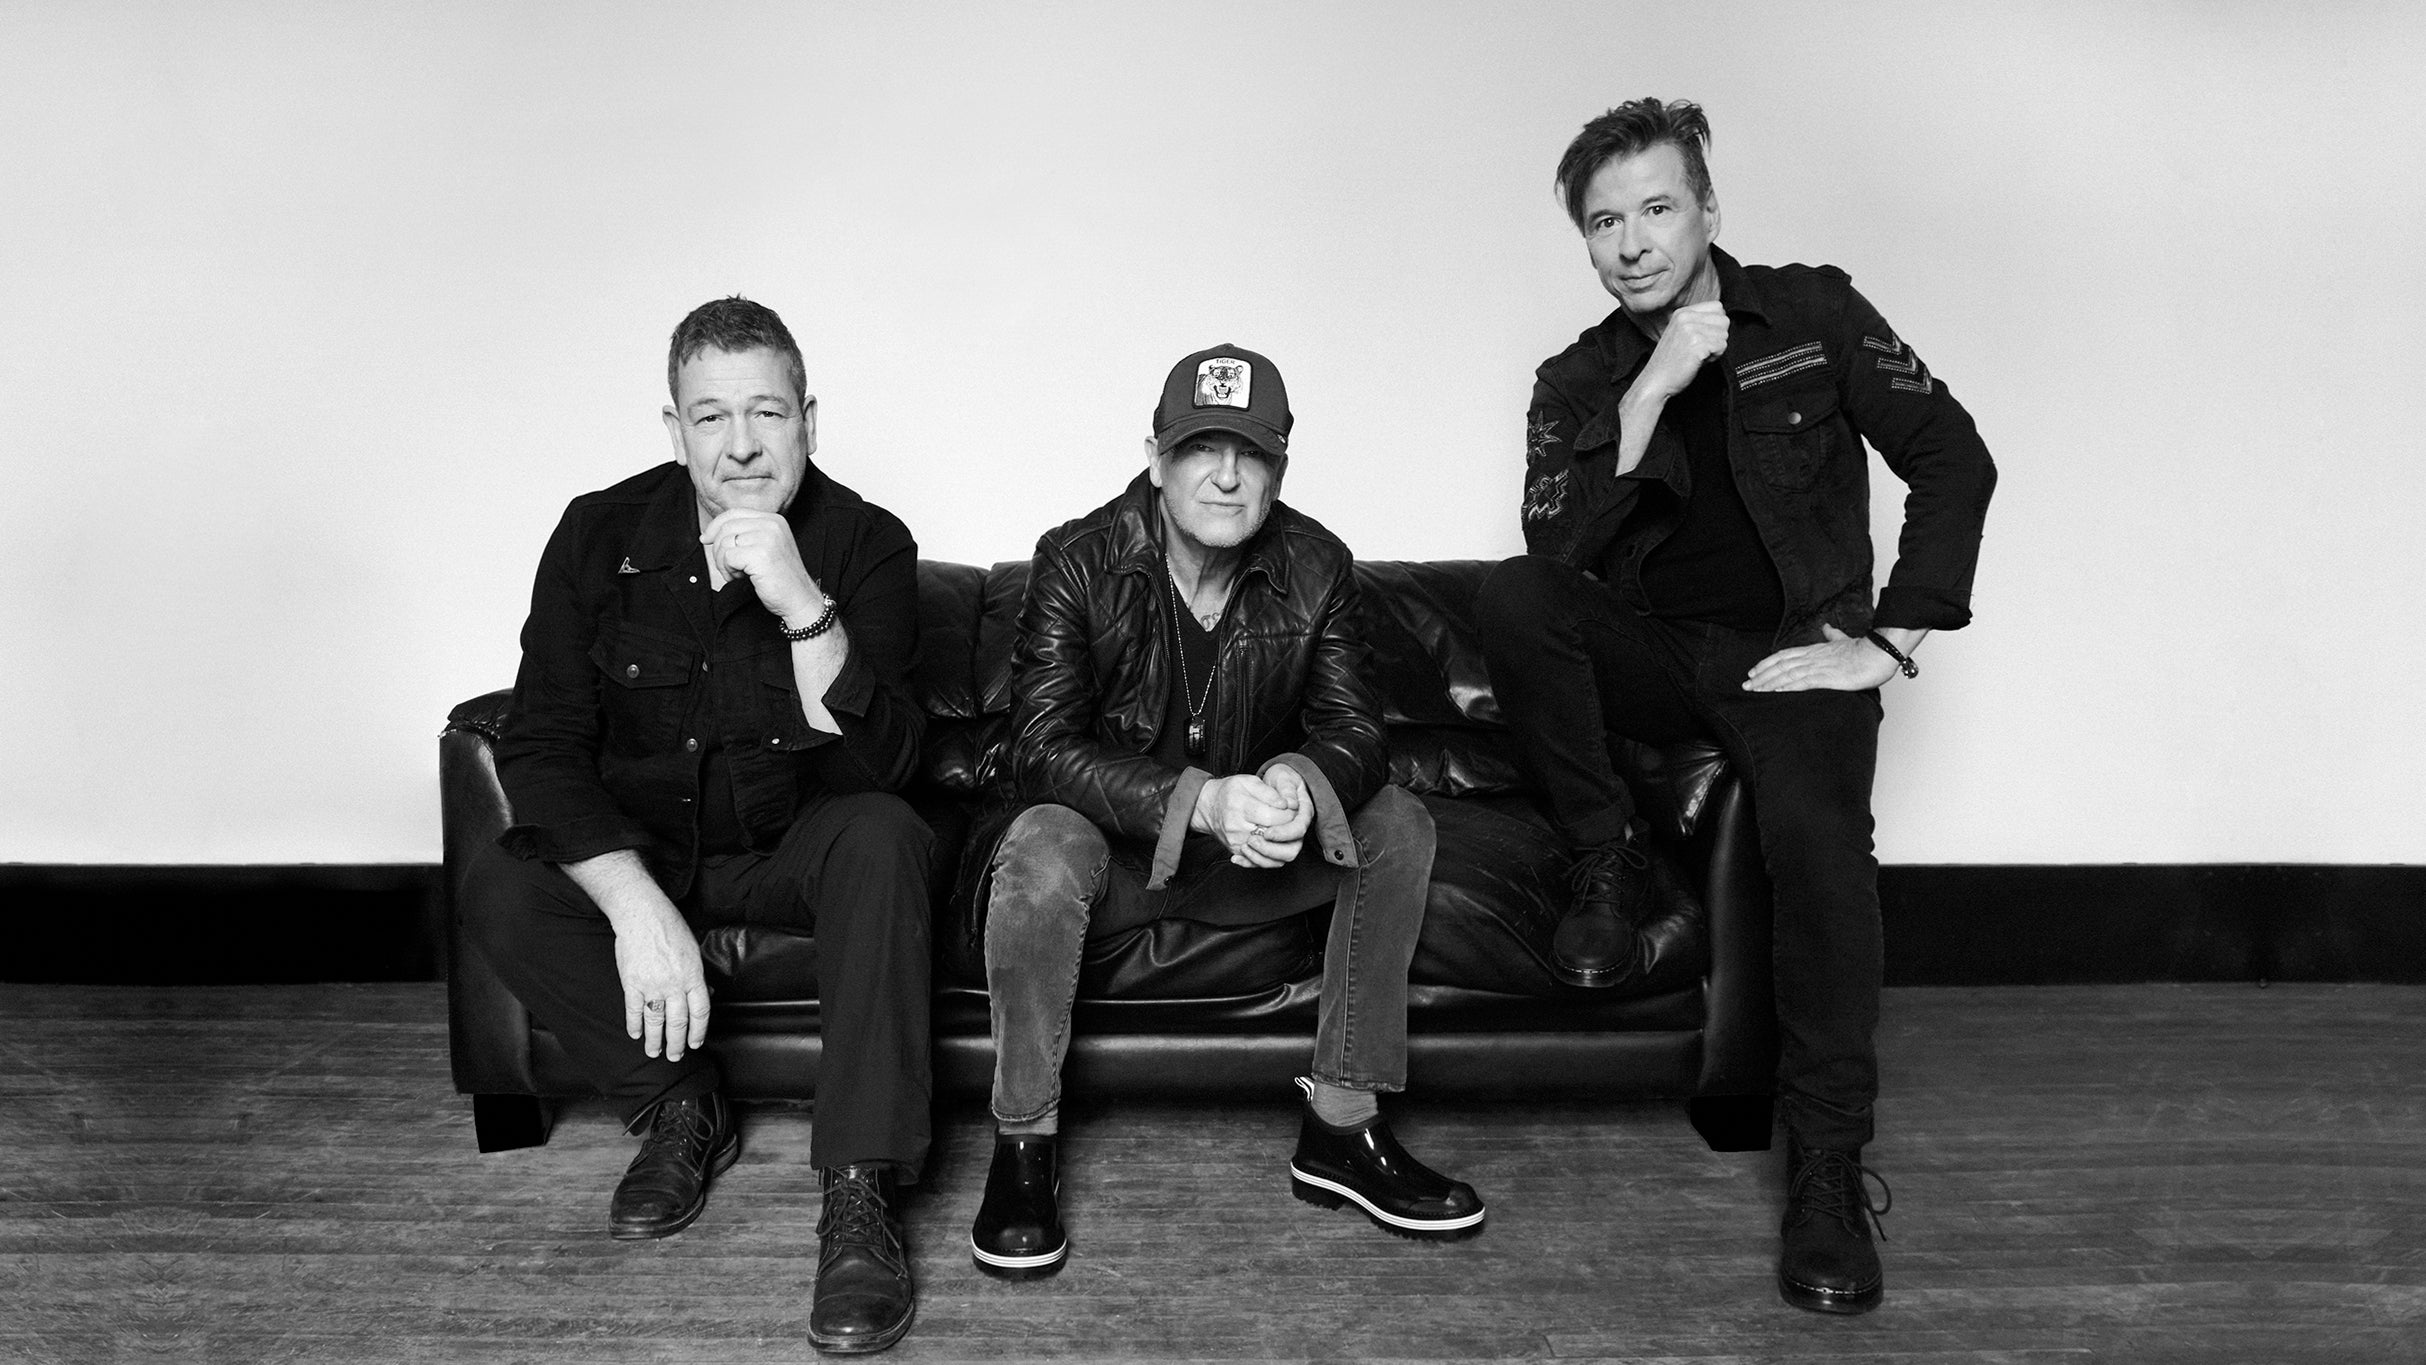 Glass Tiger with special guest The Kings in Rama promo photo for Exclusive presale offer code